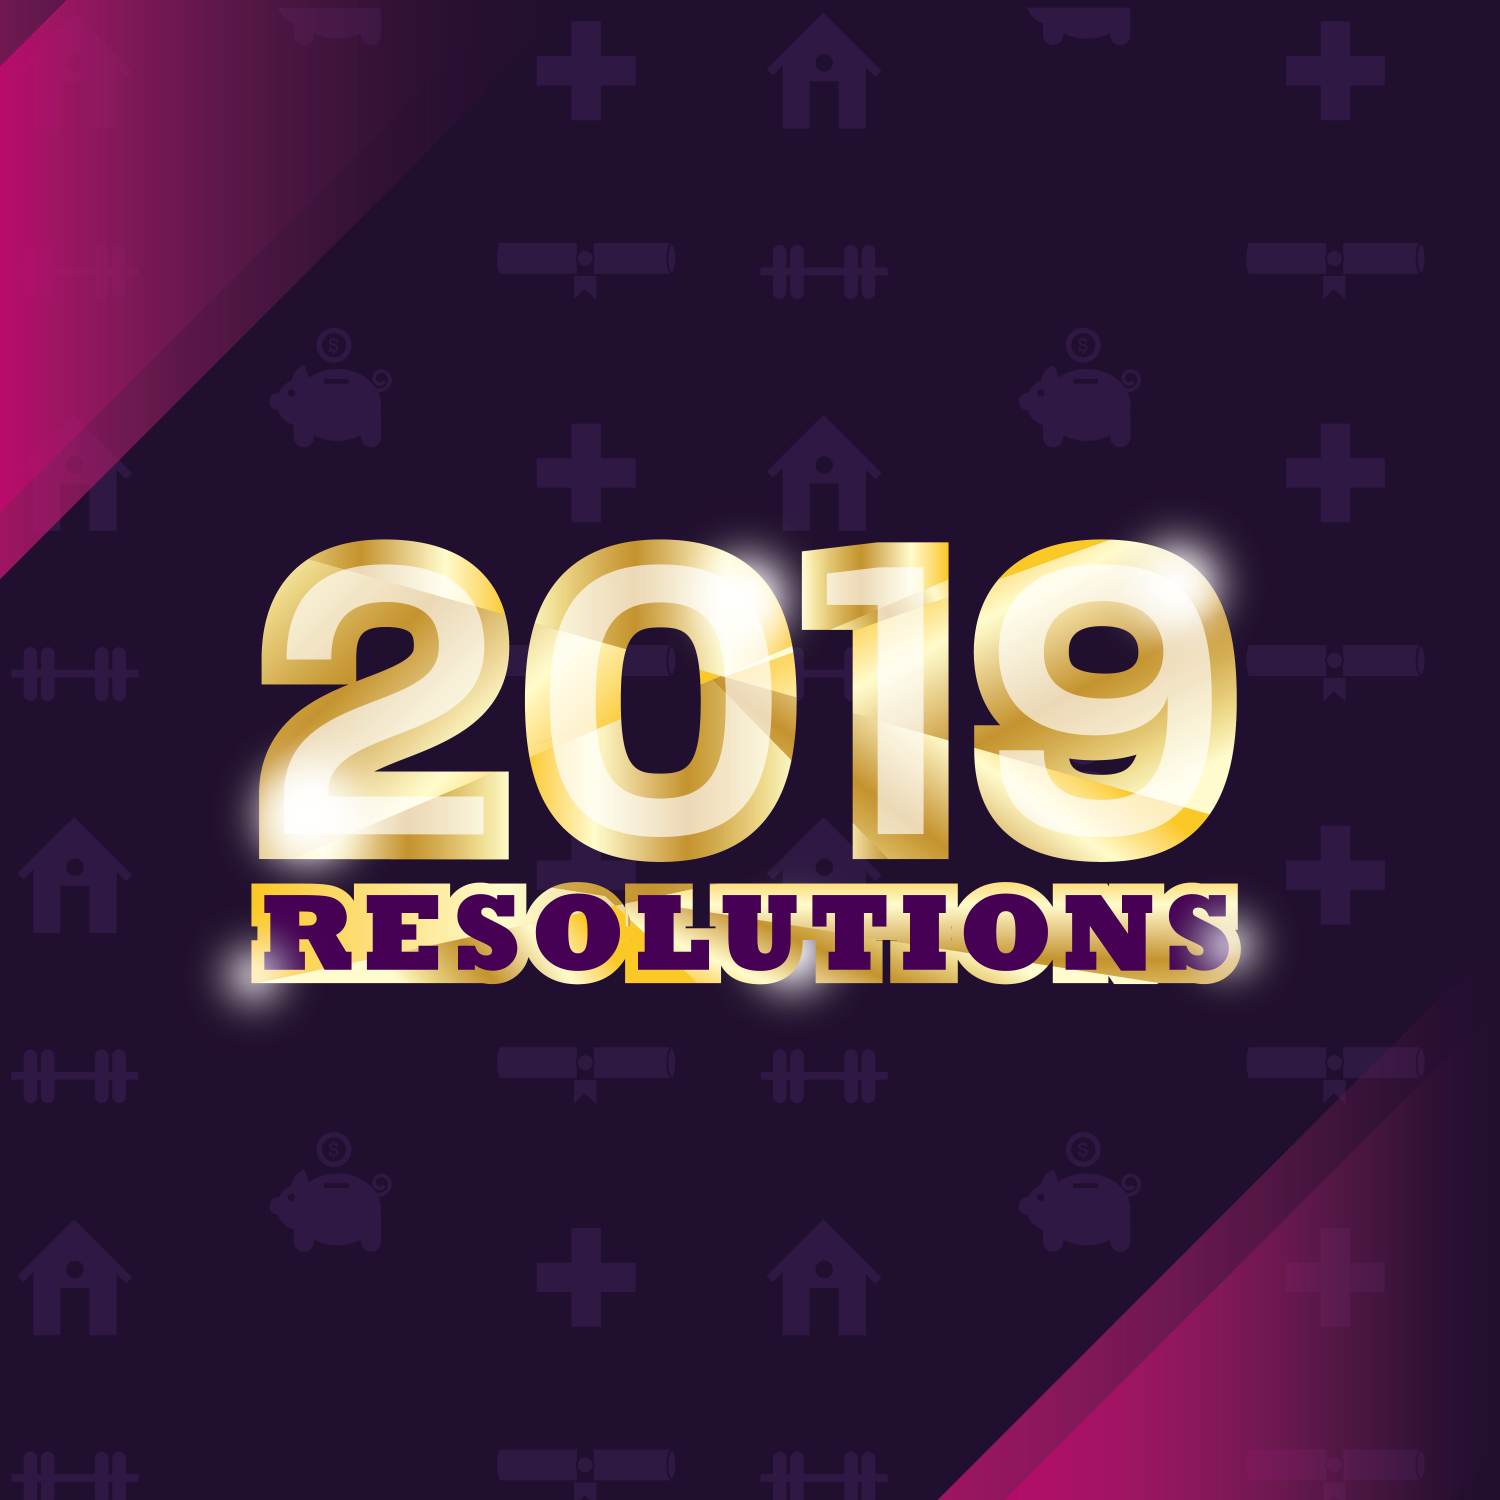 Resolve not to set resolutions